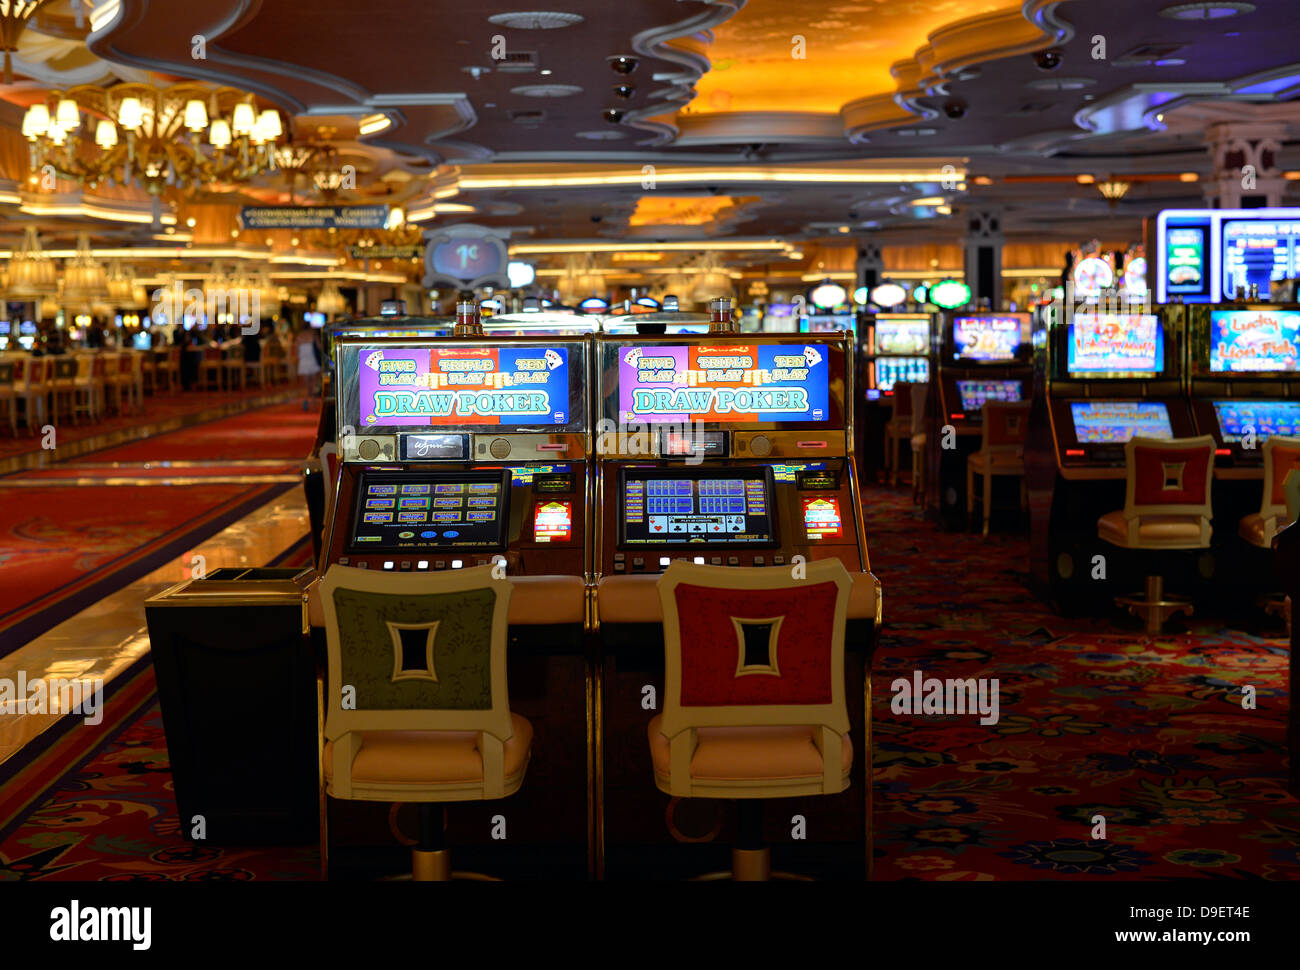 Slot machines, game of chance, one-armed bandits, five-star hotel casino Wynn, Las Vegas, Nevada, the United States of America, Stock Photo